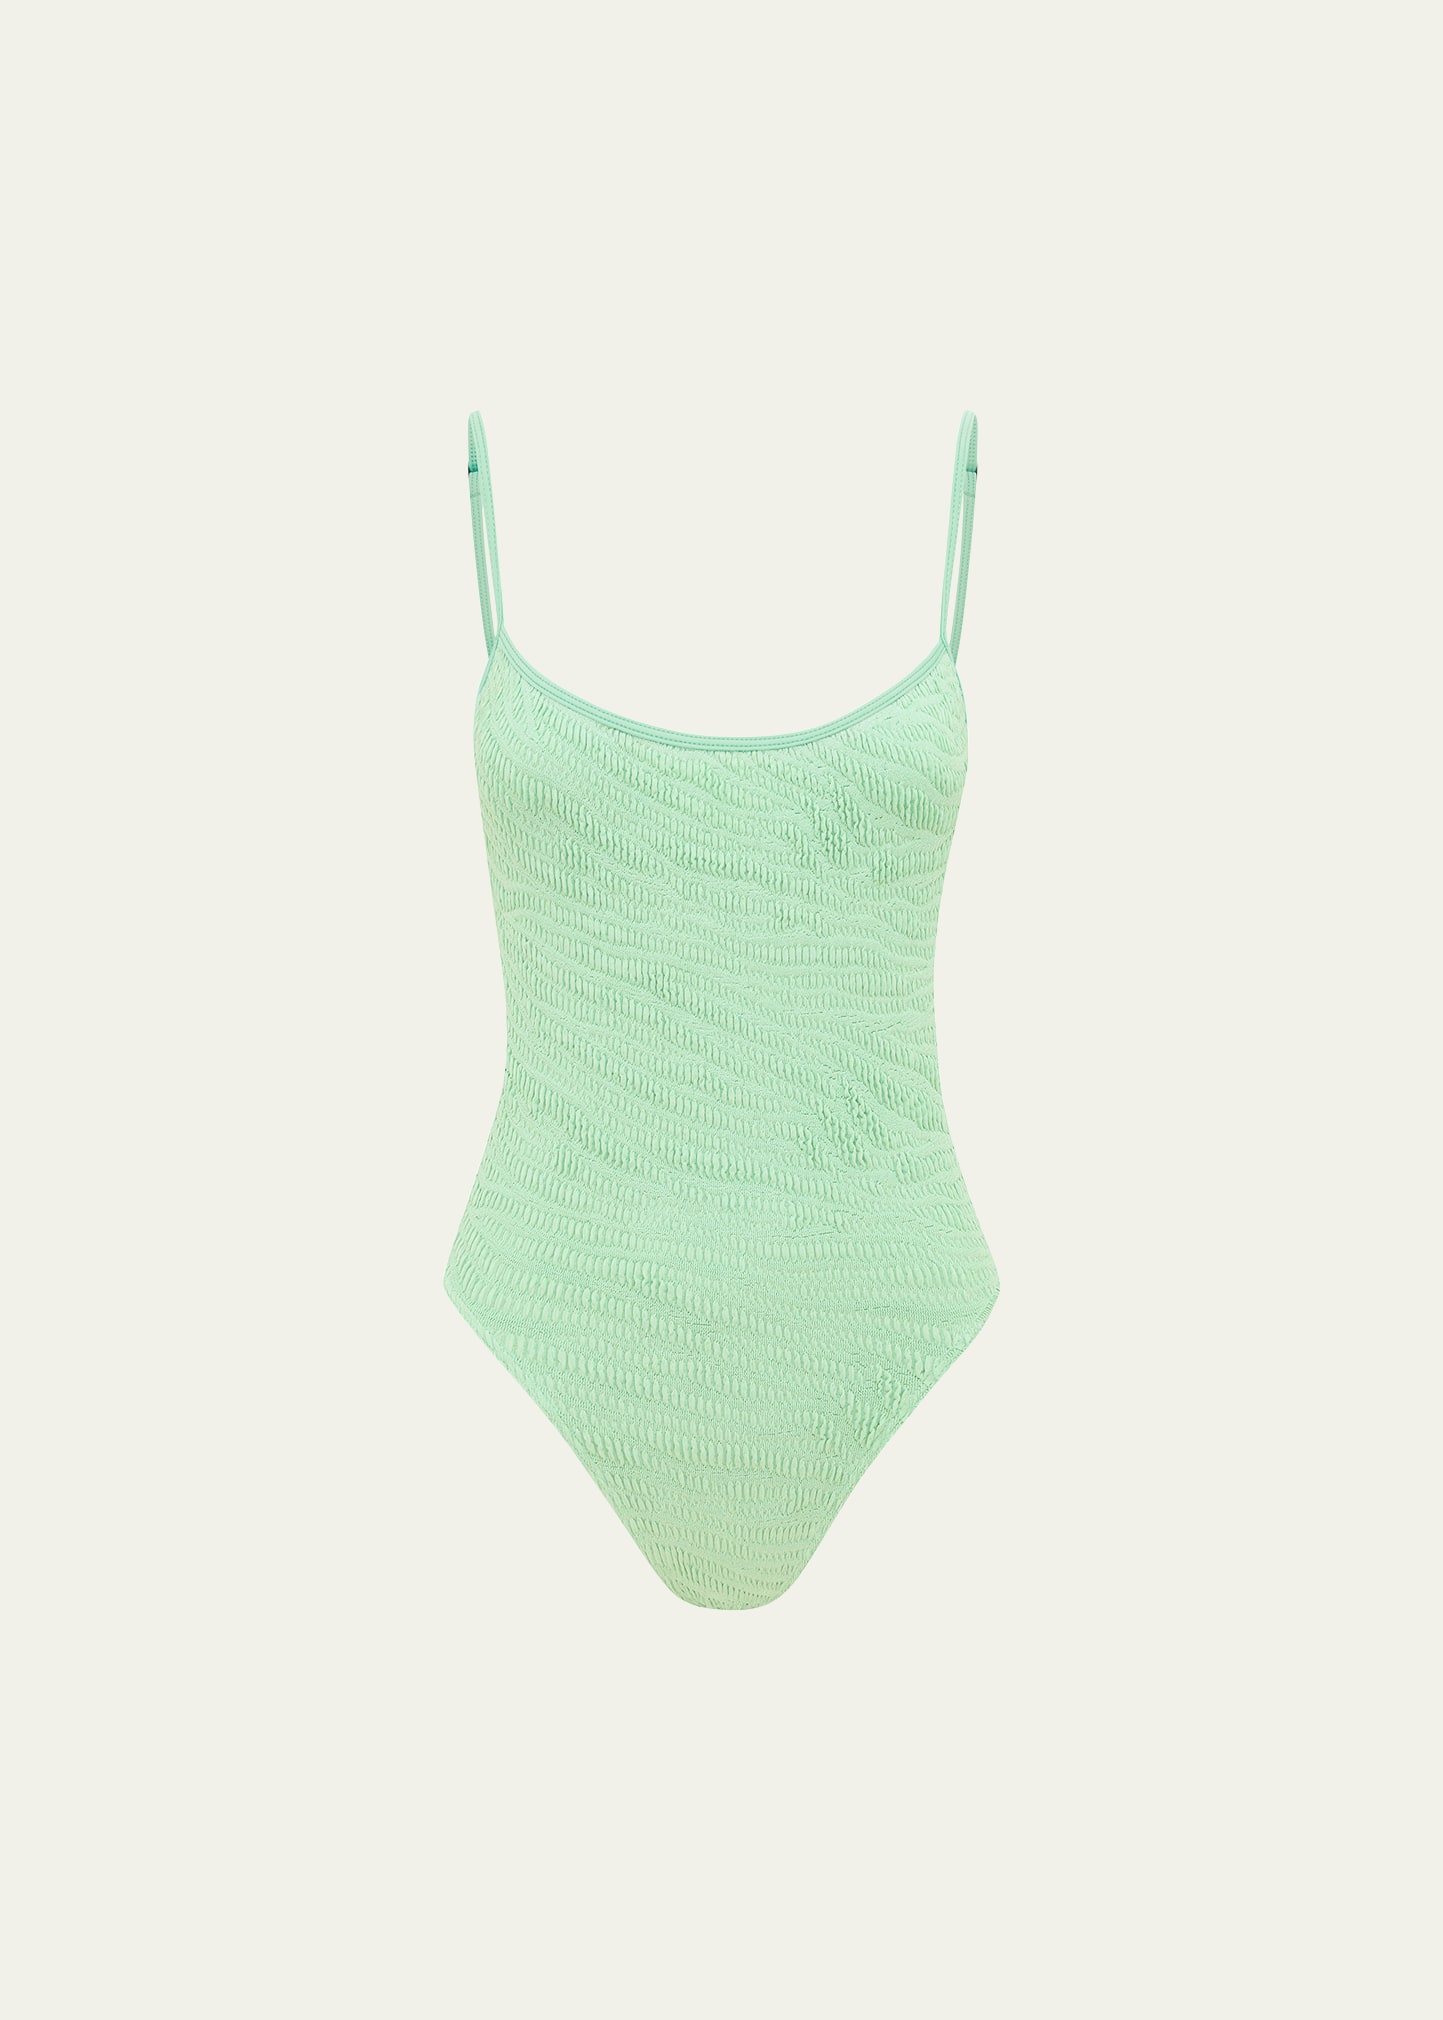 Low Palace Textured Tiger One-Piece Swimsuit (D-DD Cup)